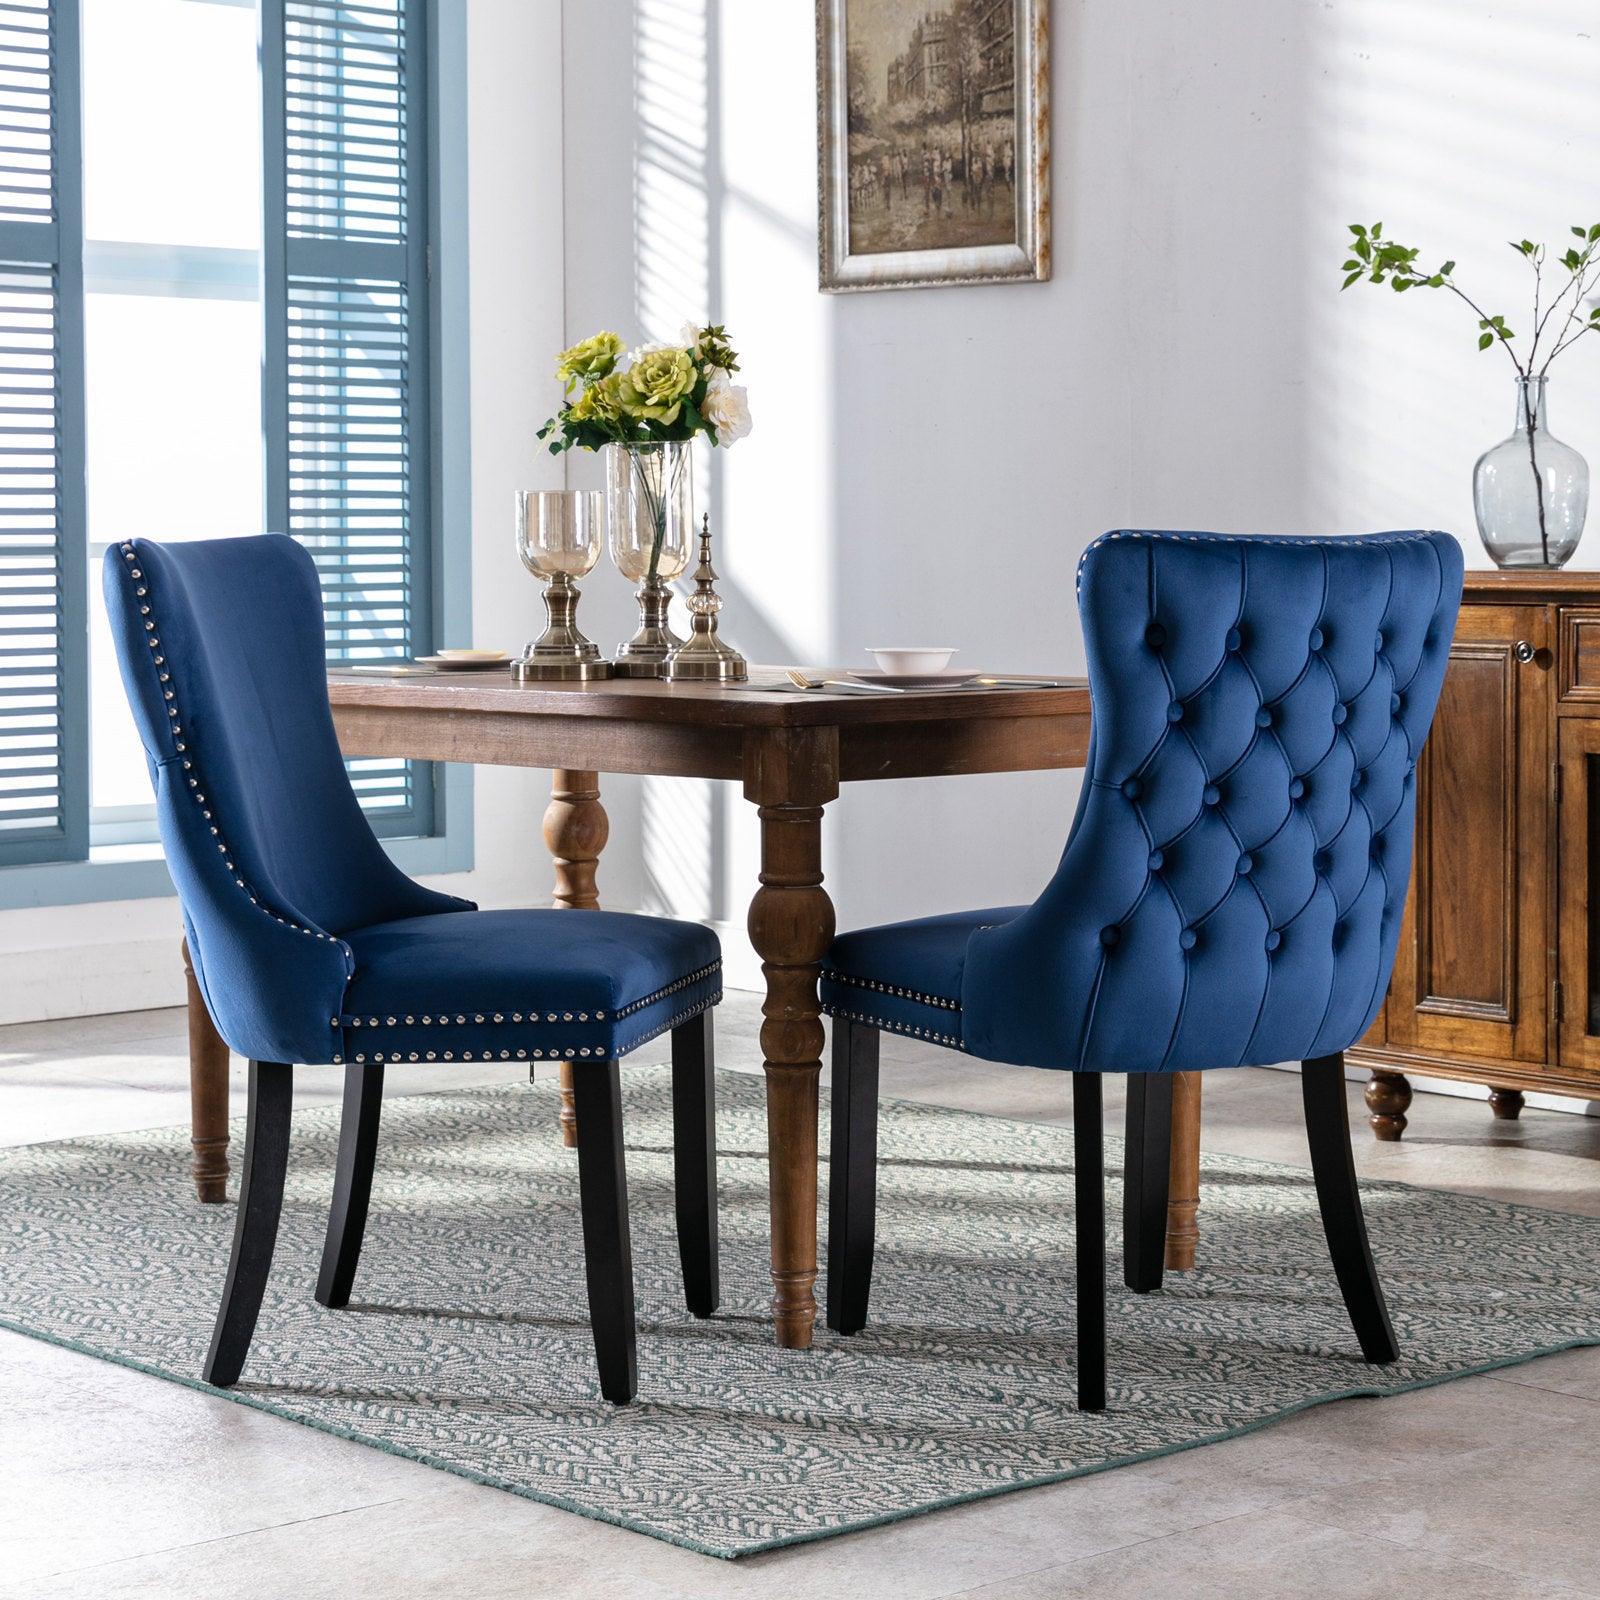 🆓🚛 Upholstered Wing-Back Dining Chair With Backstitching Nailhead Trim & Solid Wood Legs, Set Of 2, Blue